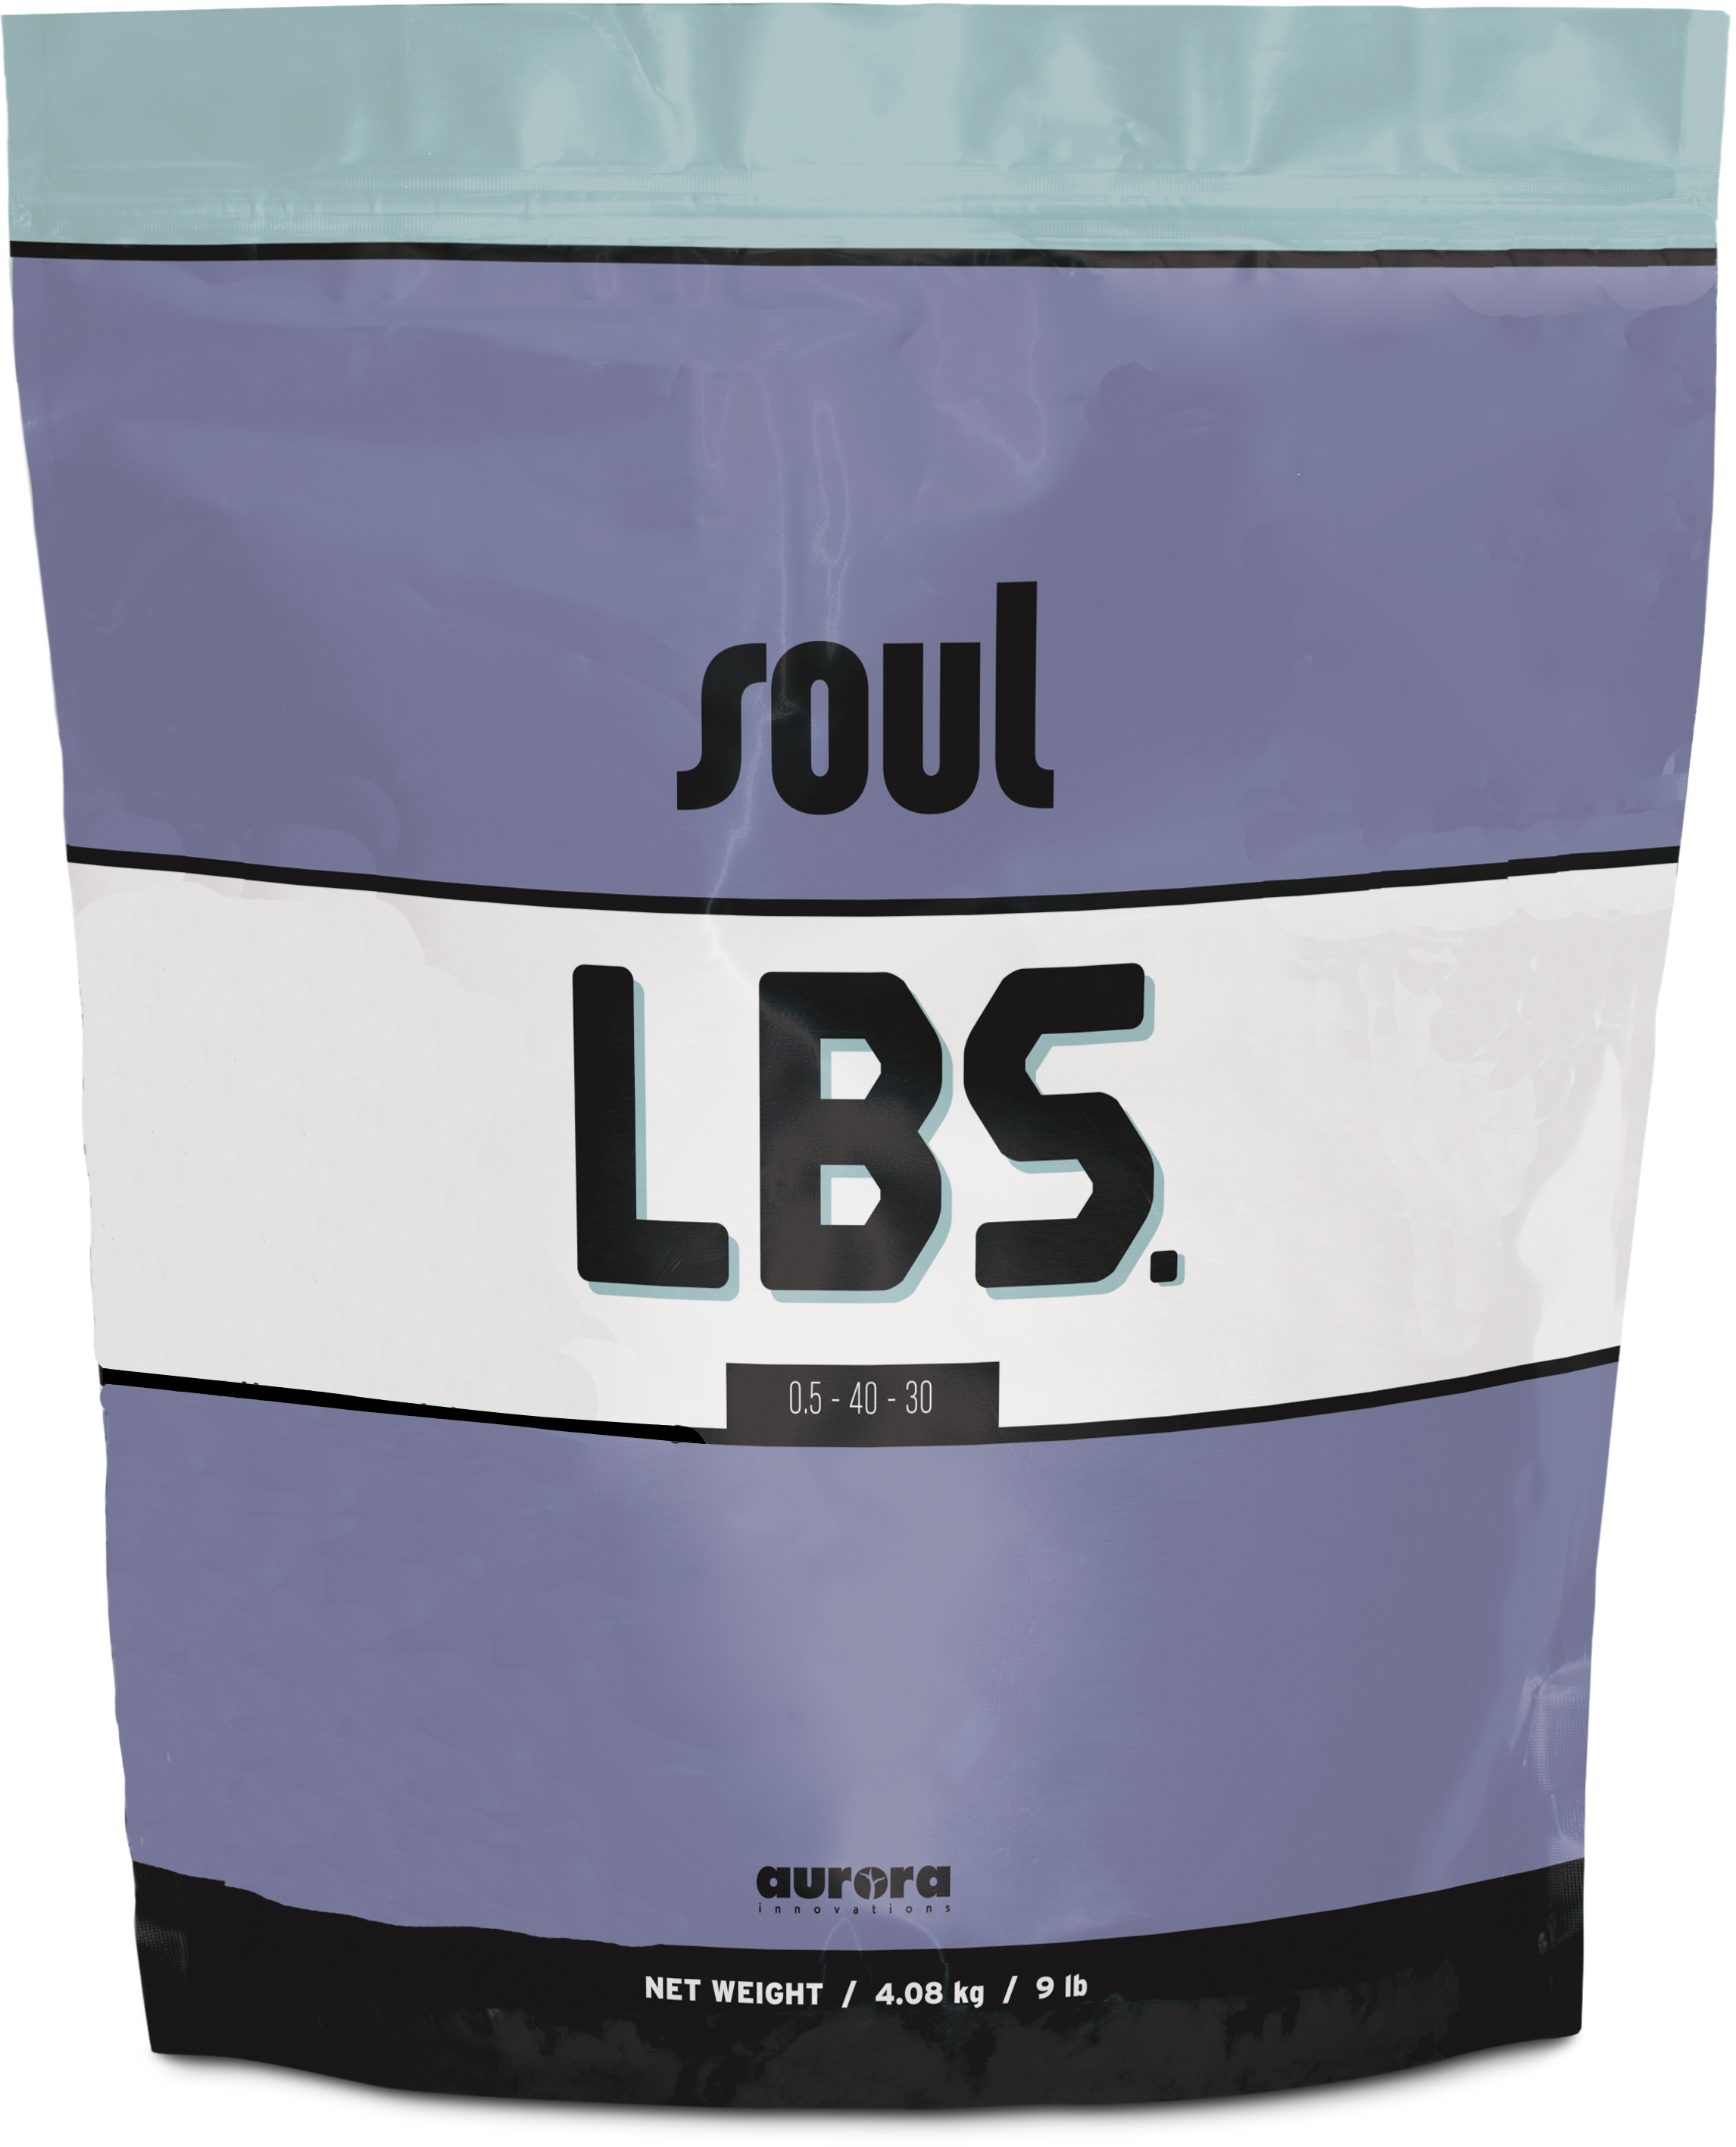 Picture for Soul LBS, 9 lb